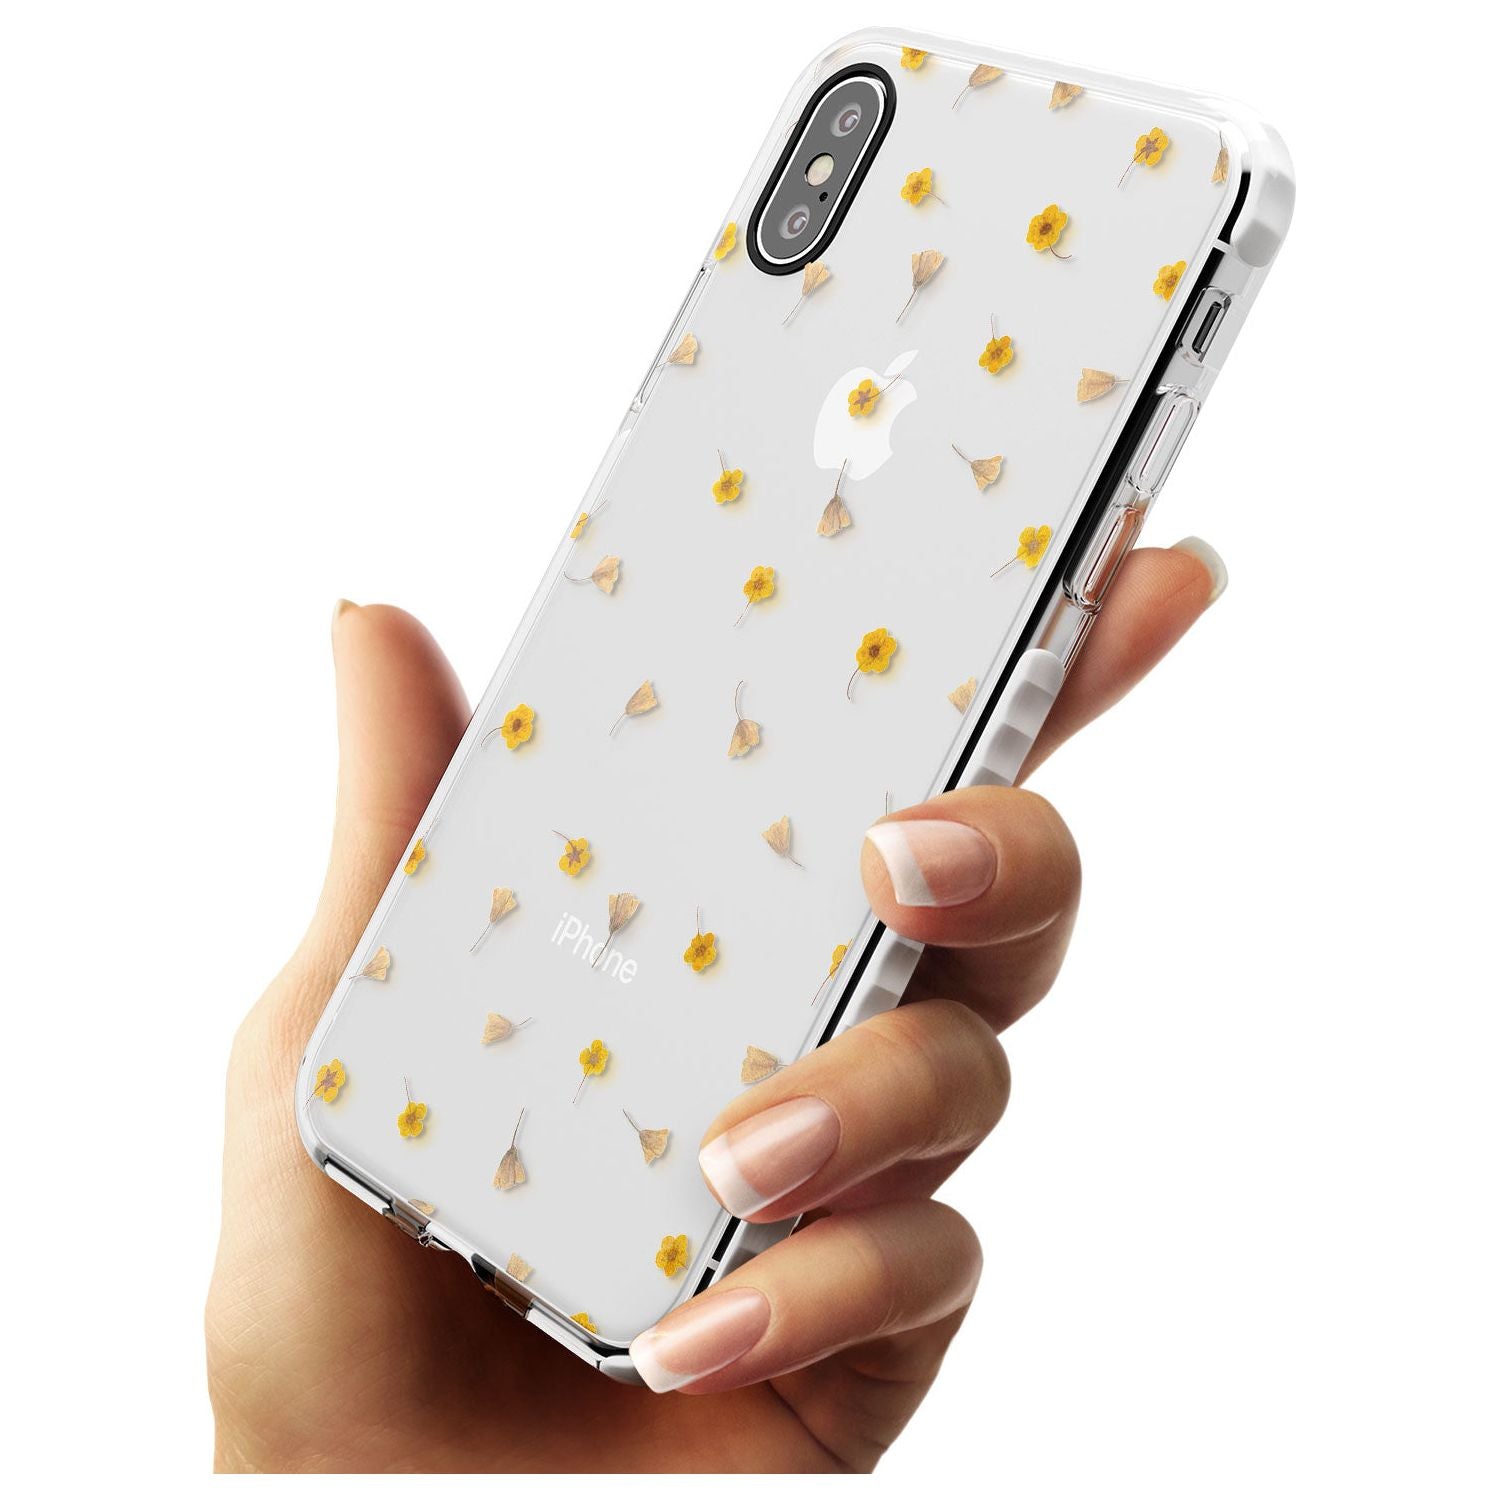 Small Flower Mix - Dried Flower-Inspired Design Impact Phone Case for iPhone X XS Max XR